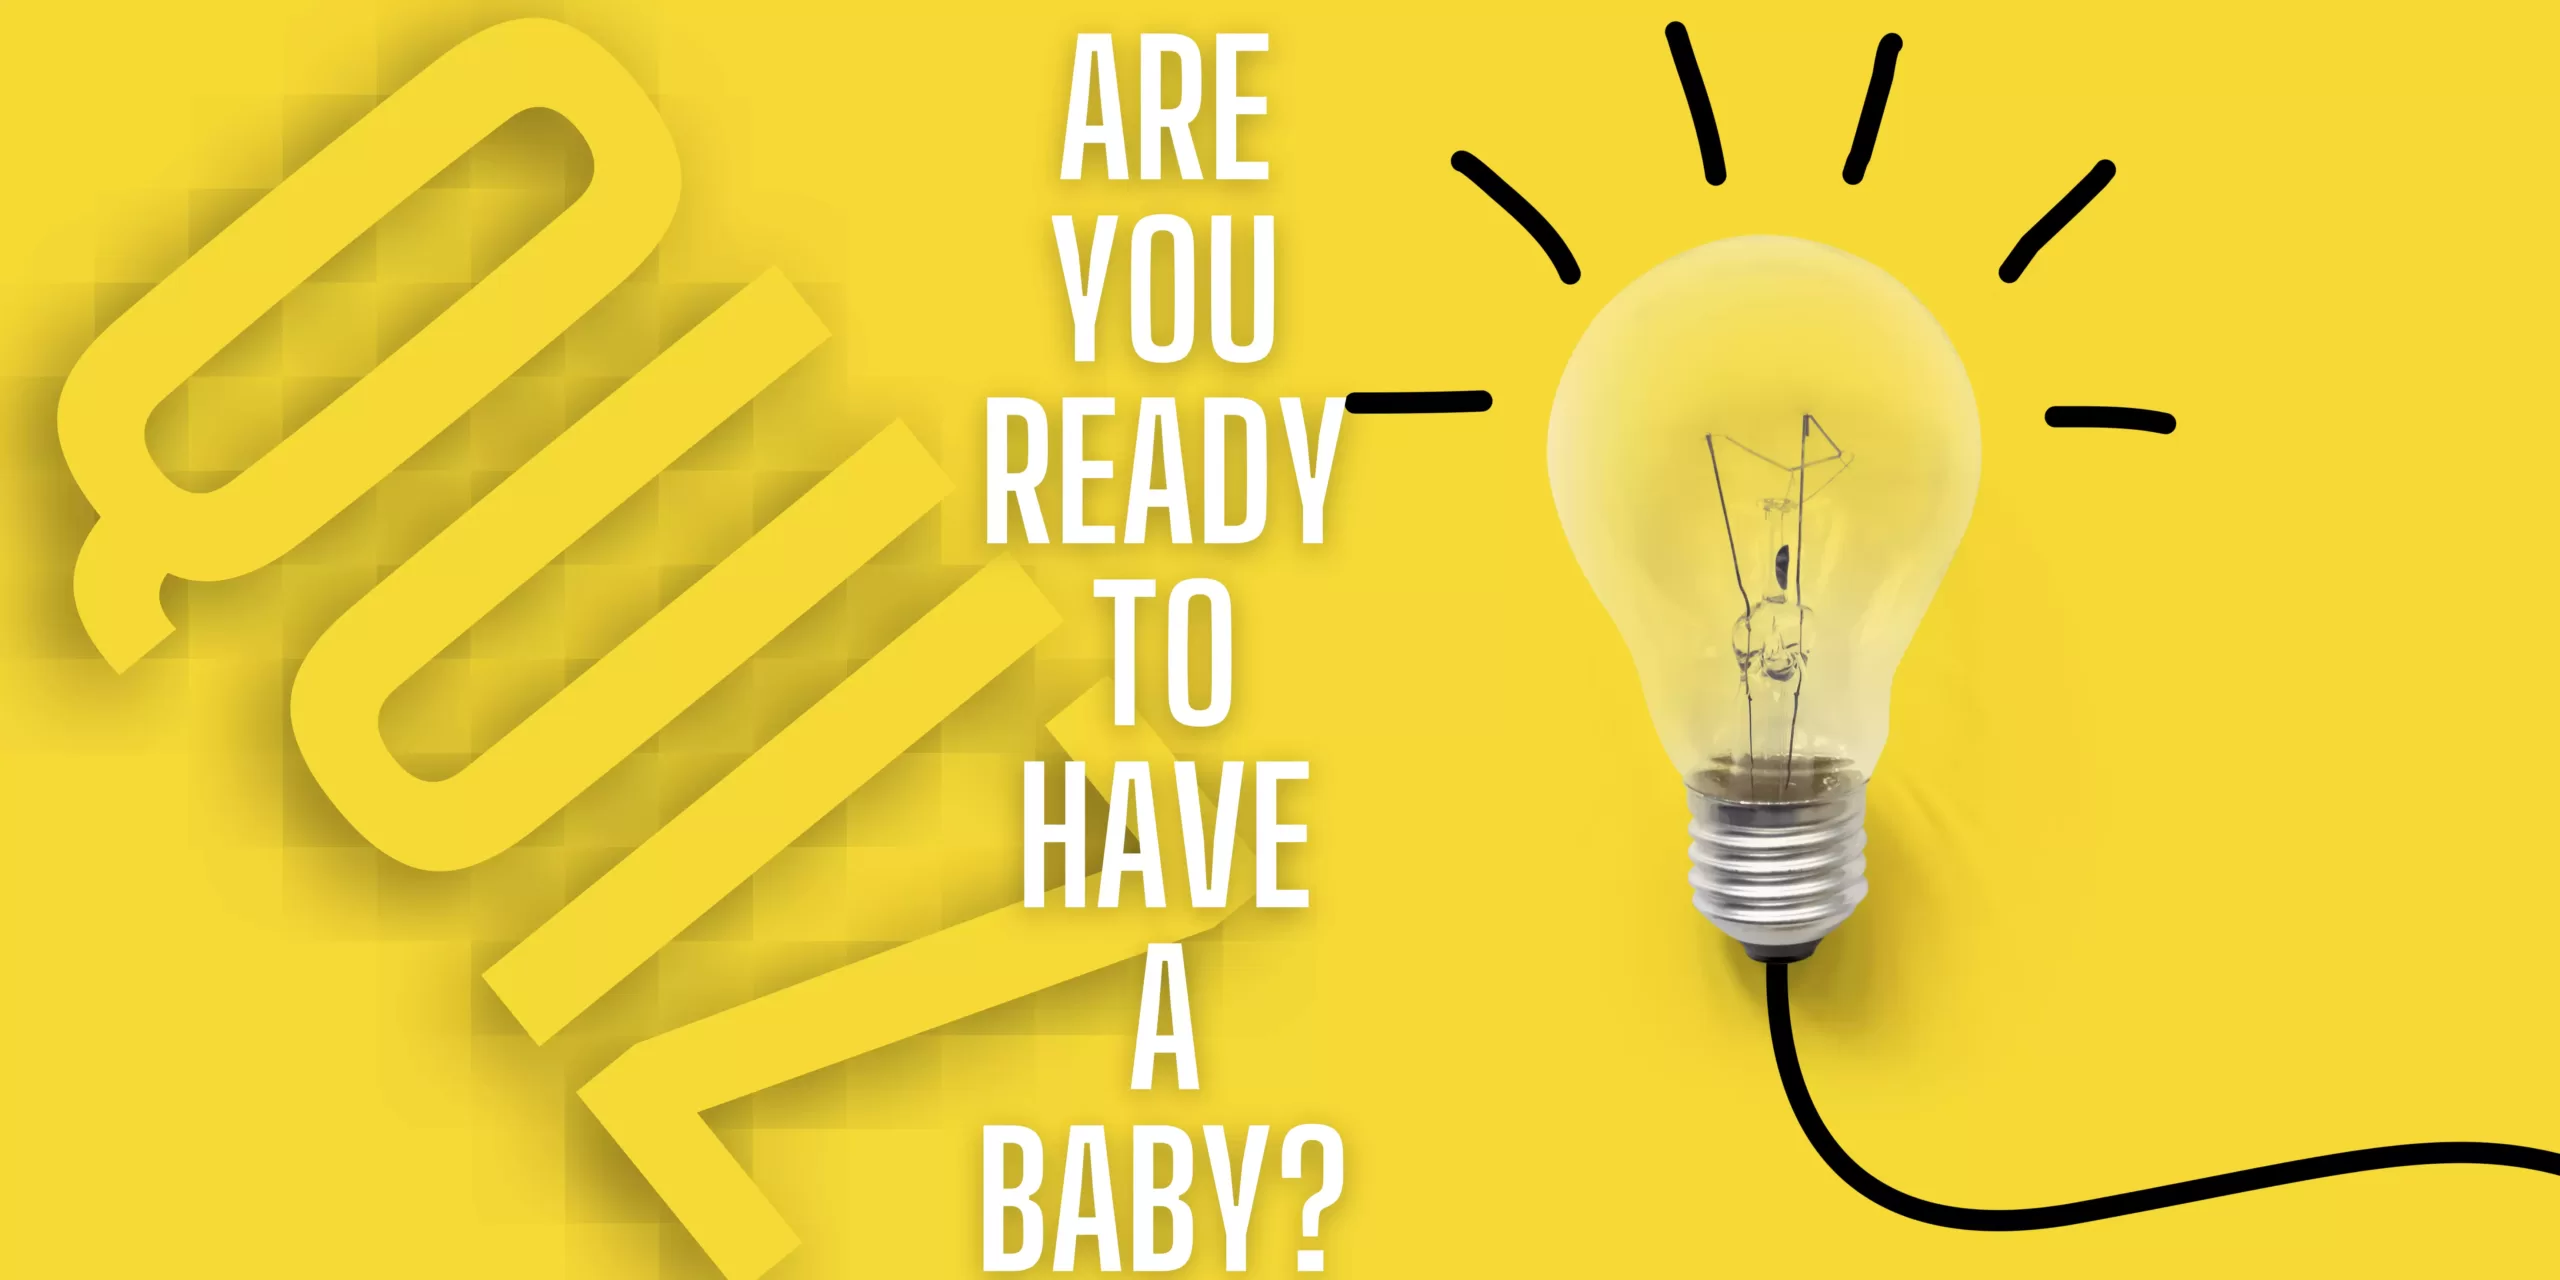 Quiz are you ready to have a baby